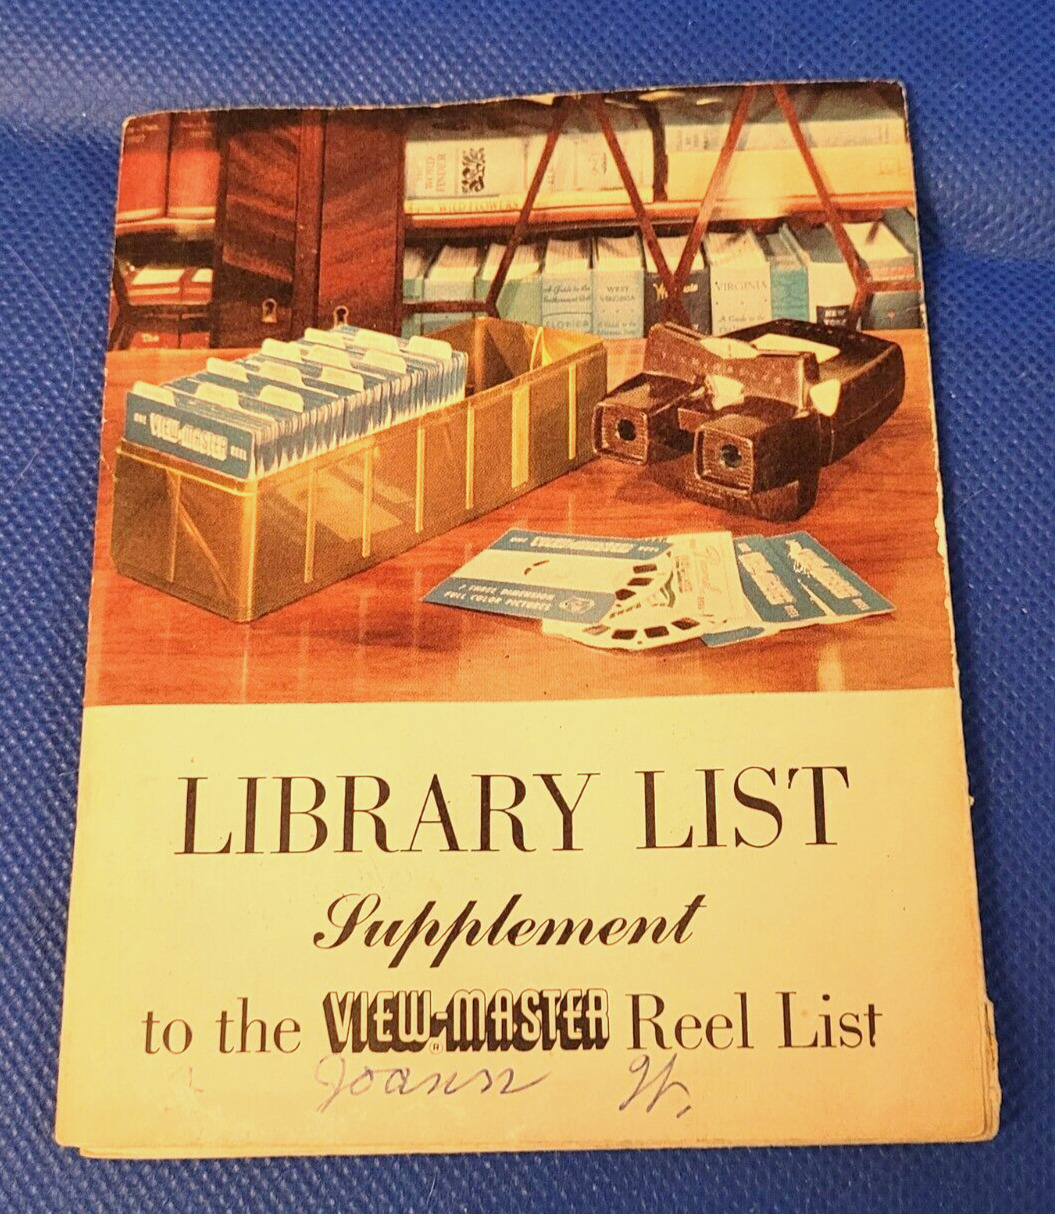 Sawyer's Library List Supplement to the view-master Reel List December 1955